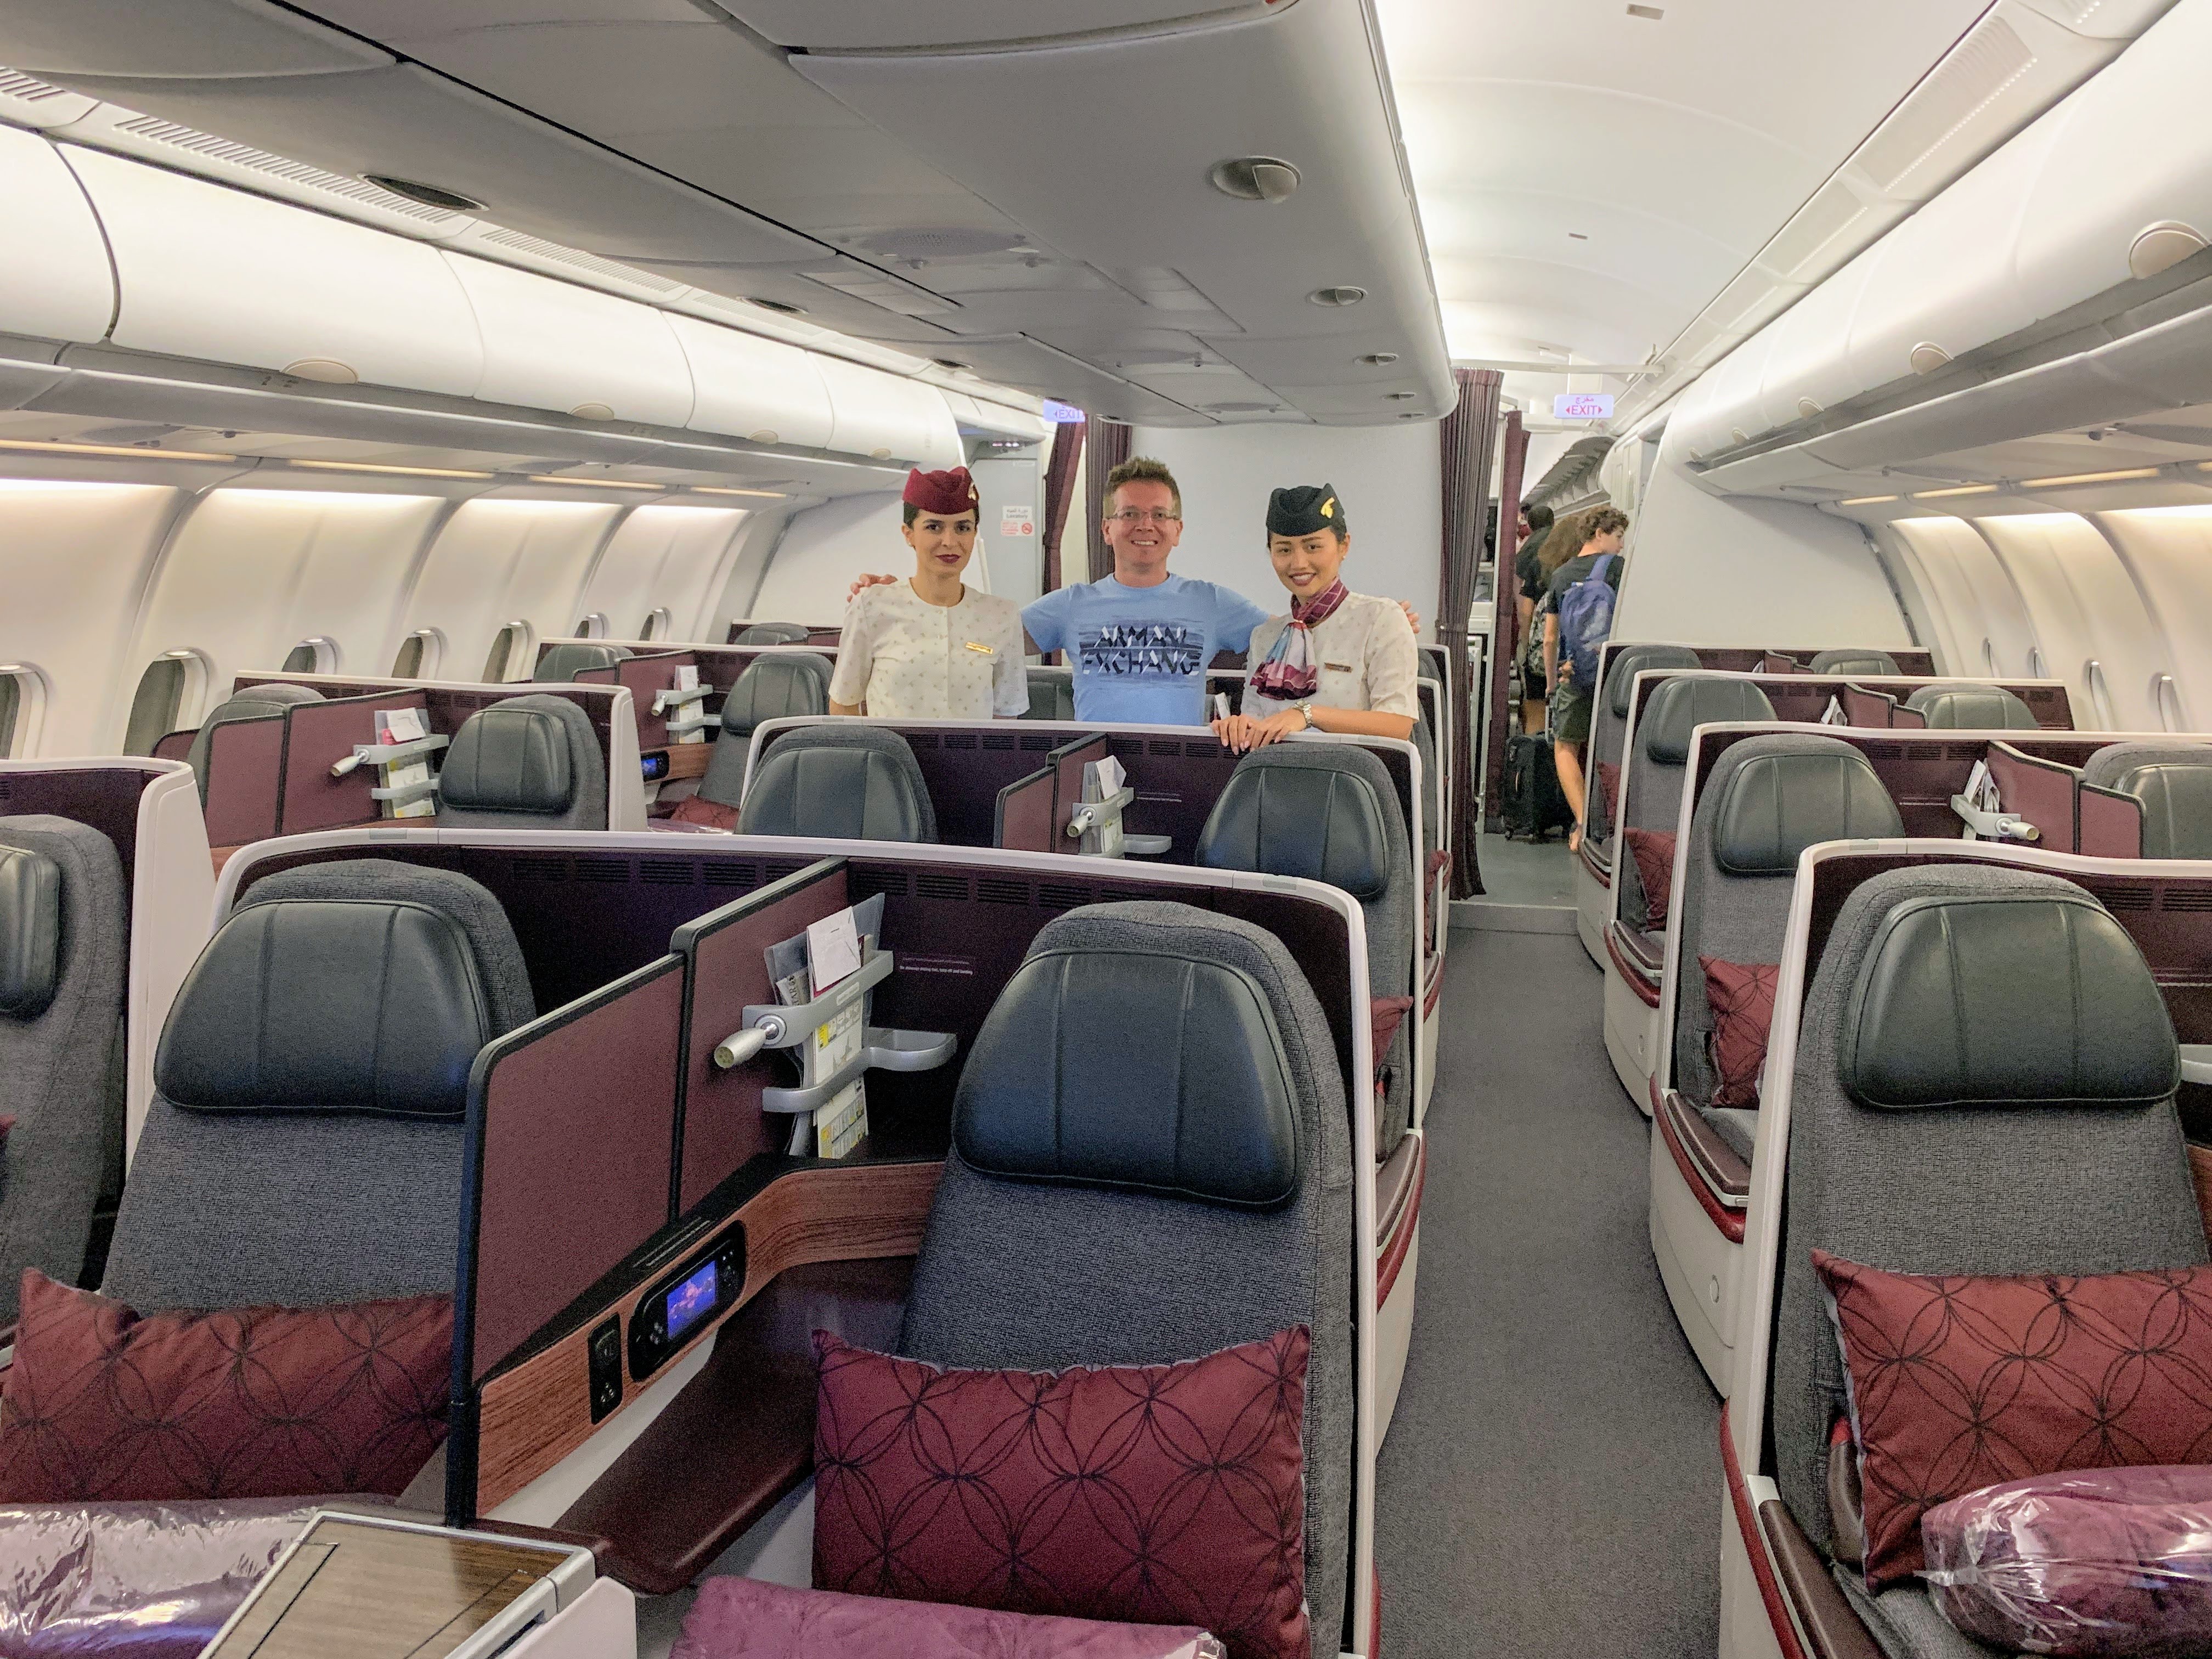 Qatar Airways A330-200 Business Class Review with the Entire Cabin